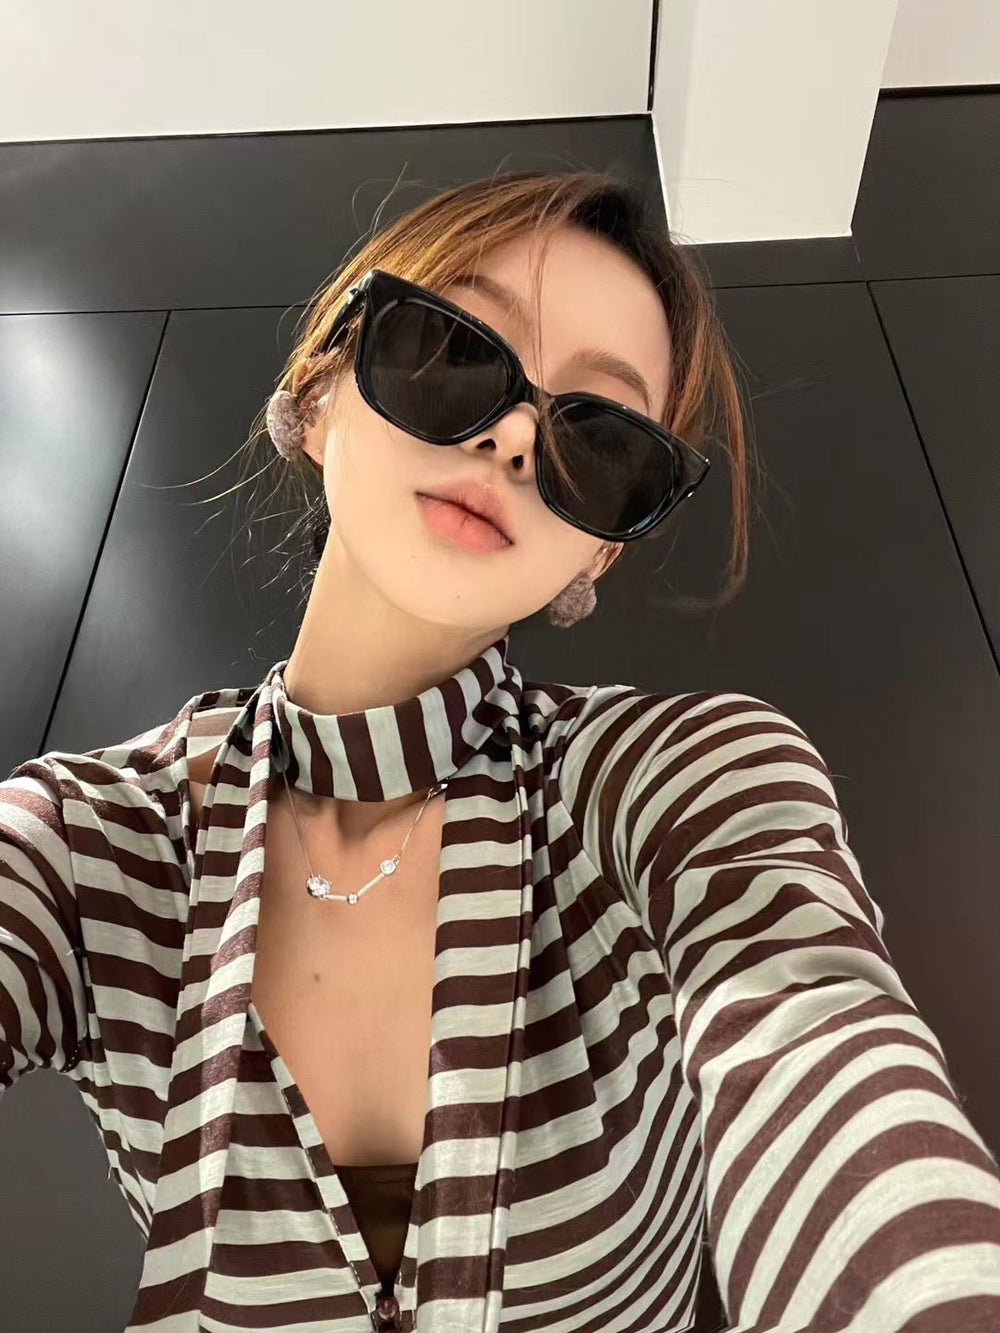 With an air of sophistication, a woman donning a striped shirt and trendy sunglasses exudes a timeless sense of style and grace.